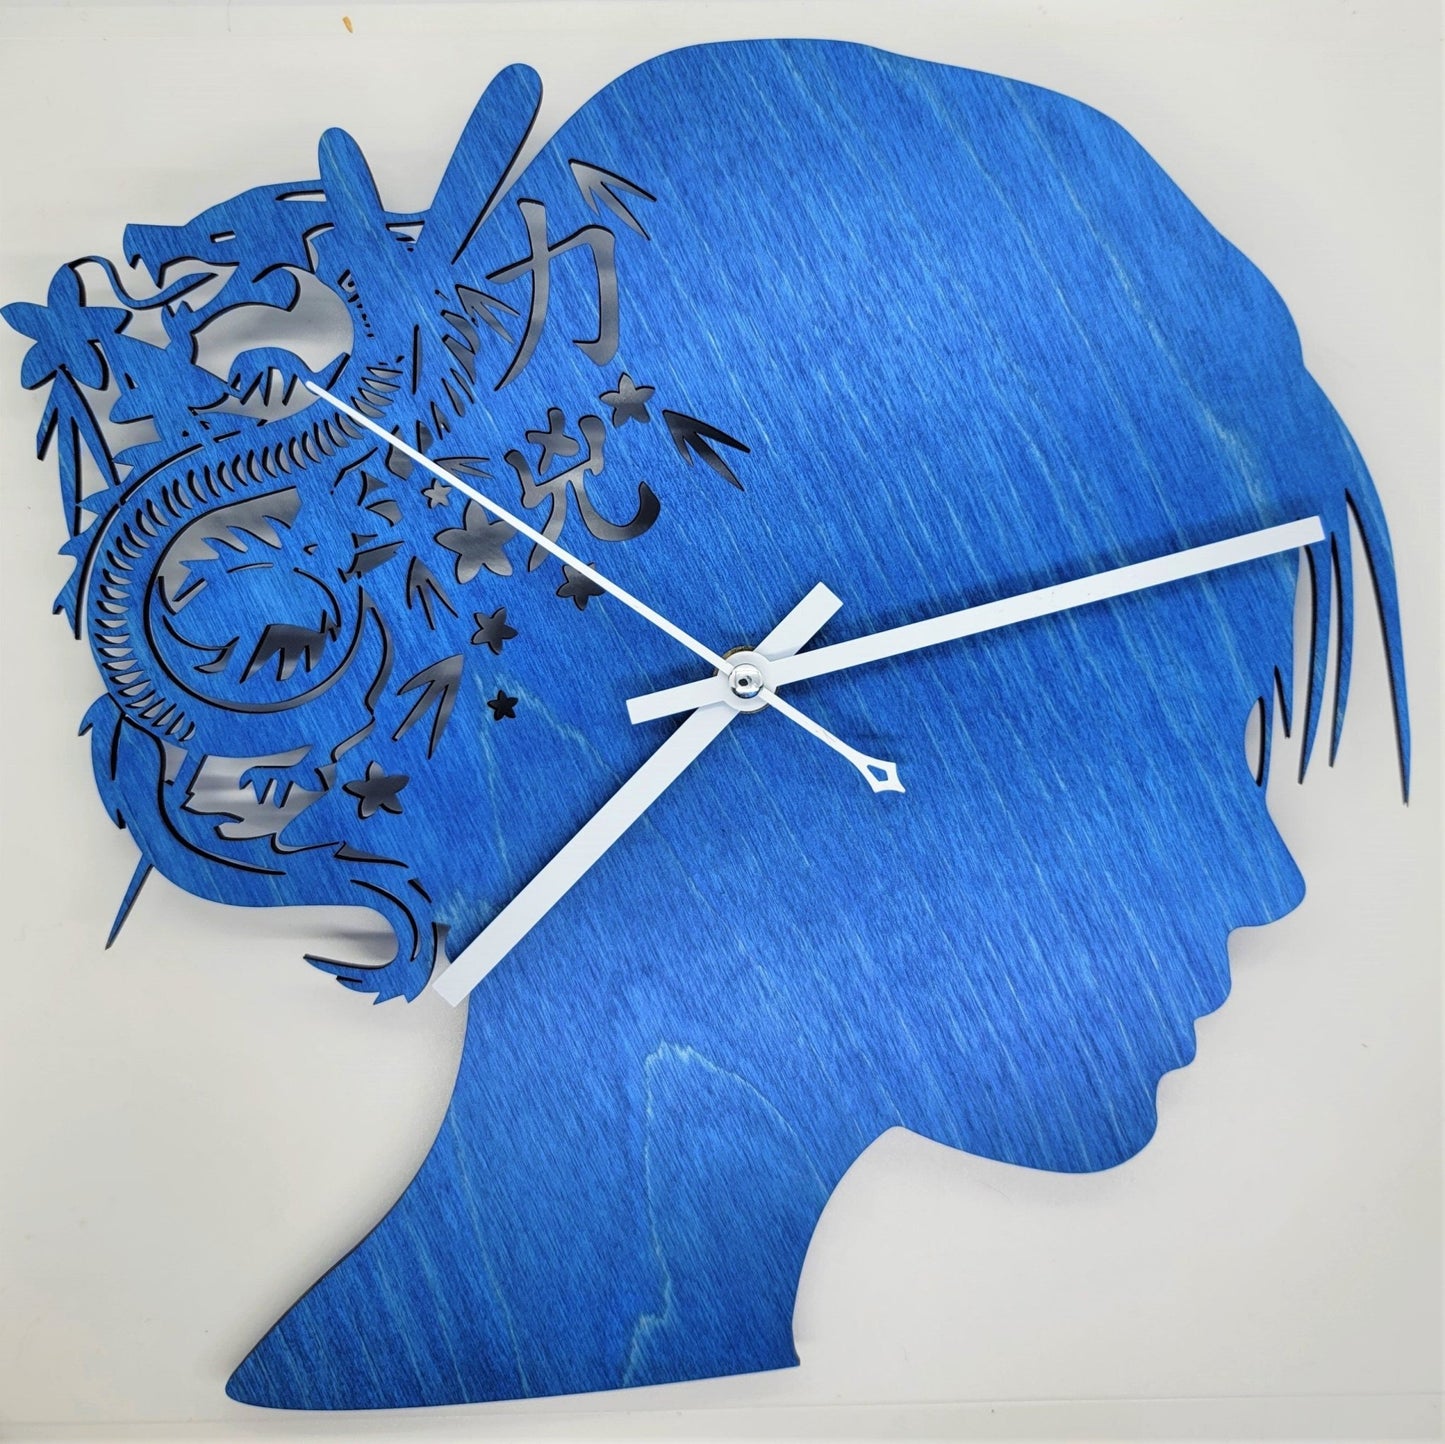 Woman and Dragon Silhouette Personalized Wall Clock